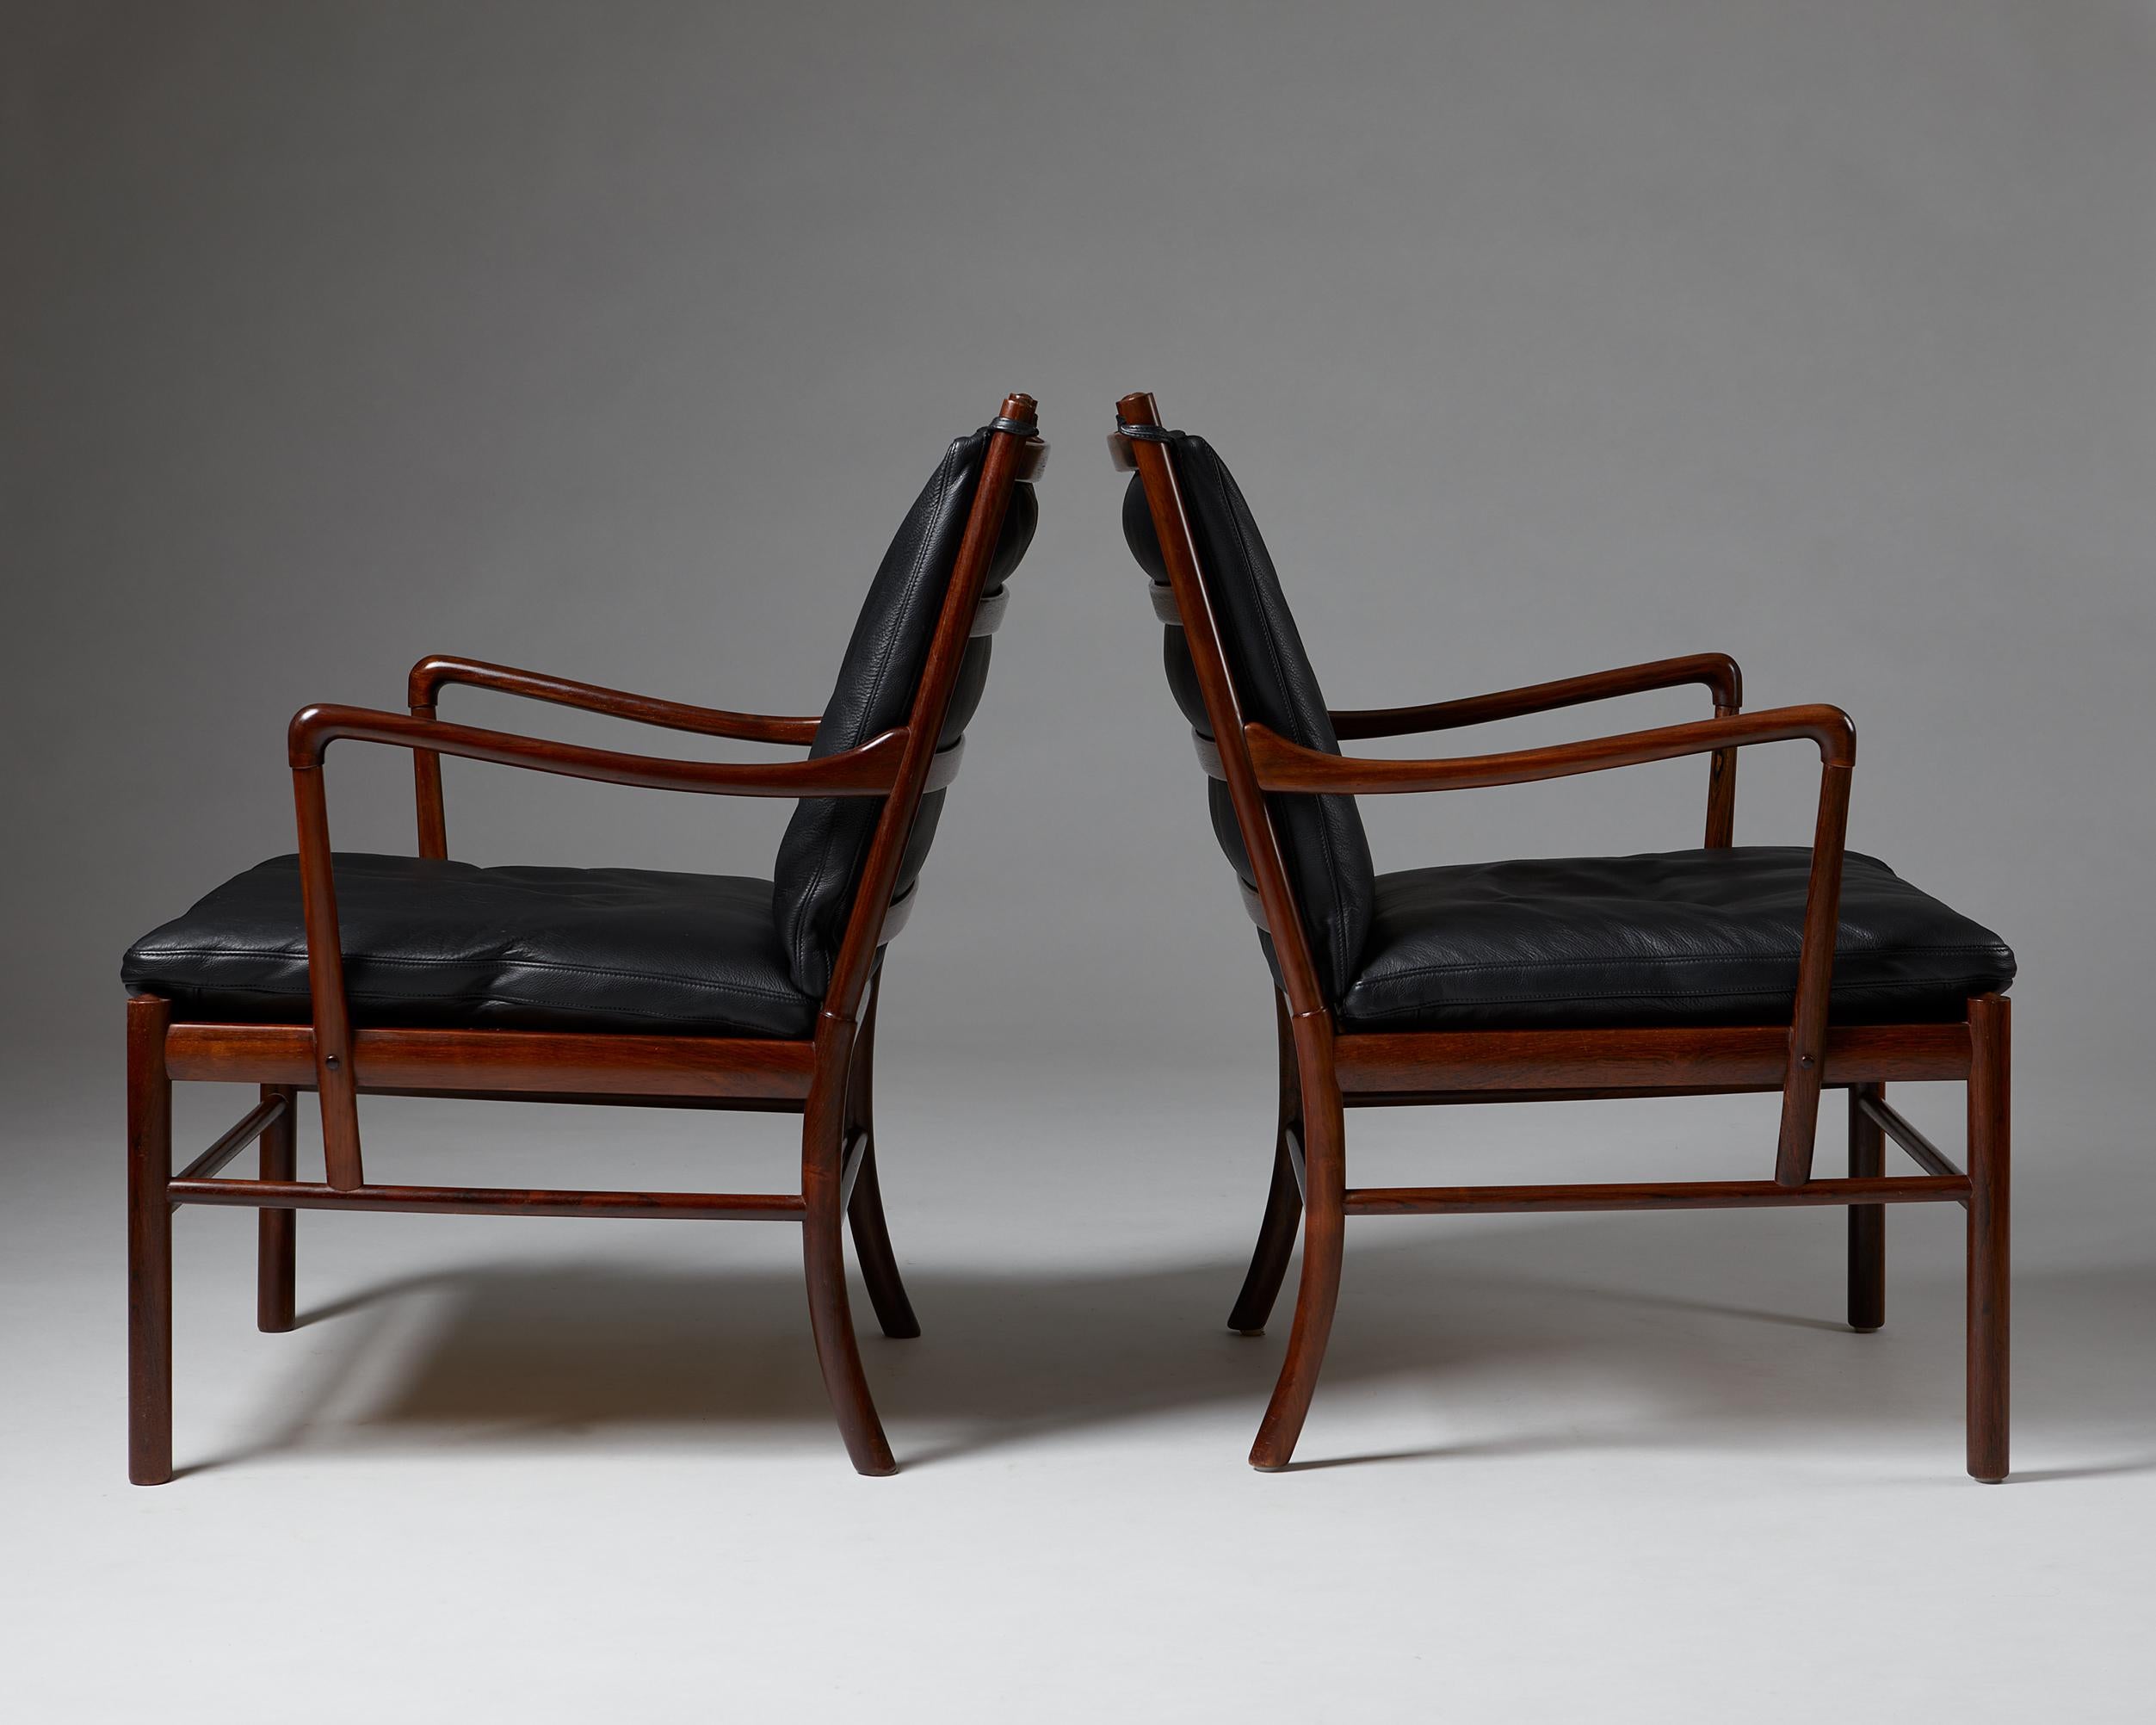 Scandinavian Modern Pair of Colonial Chairs Model PJ 149 Designed by Ole Wanscher for Poul Jeppesen